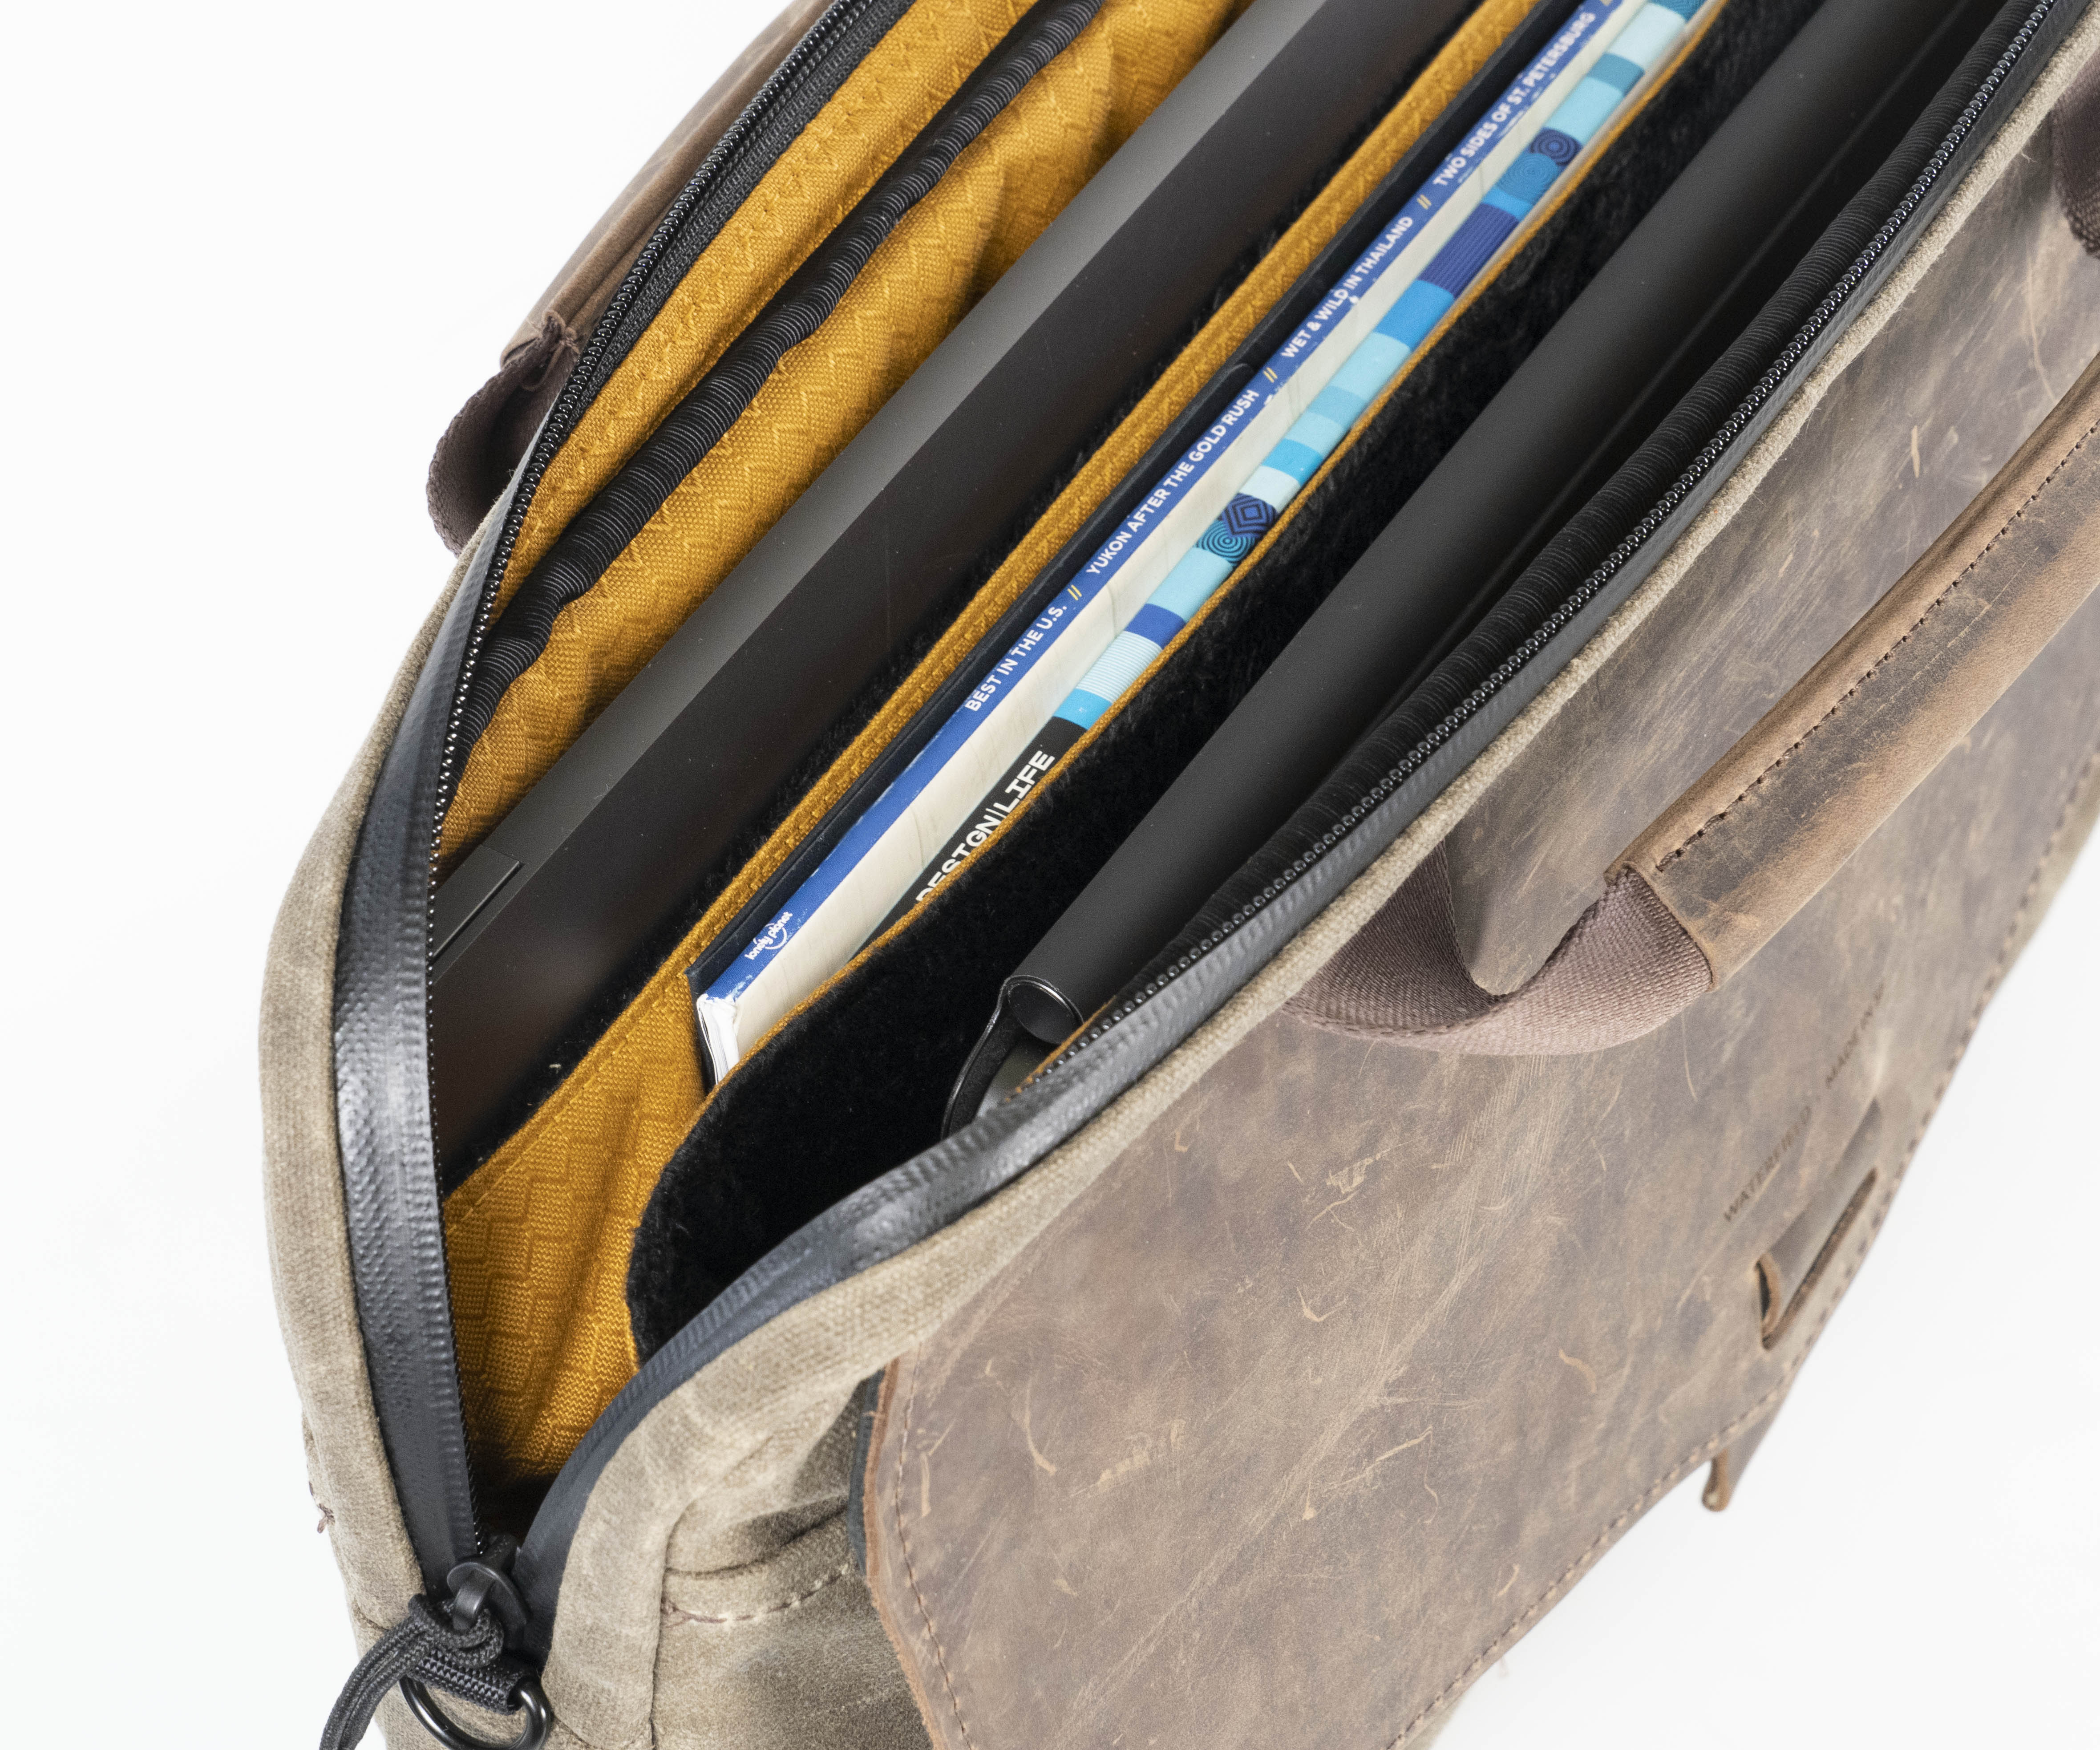 Two plush laptop compartments encased by impact-resistant foam, lined no-scratch fabric.